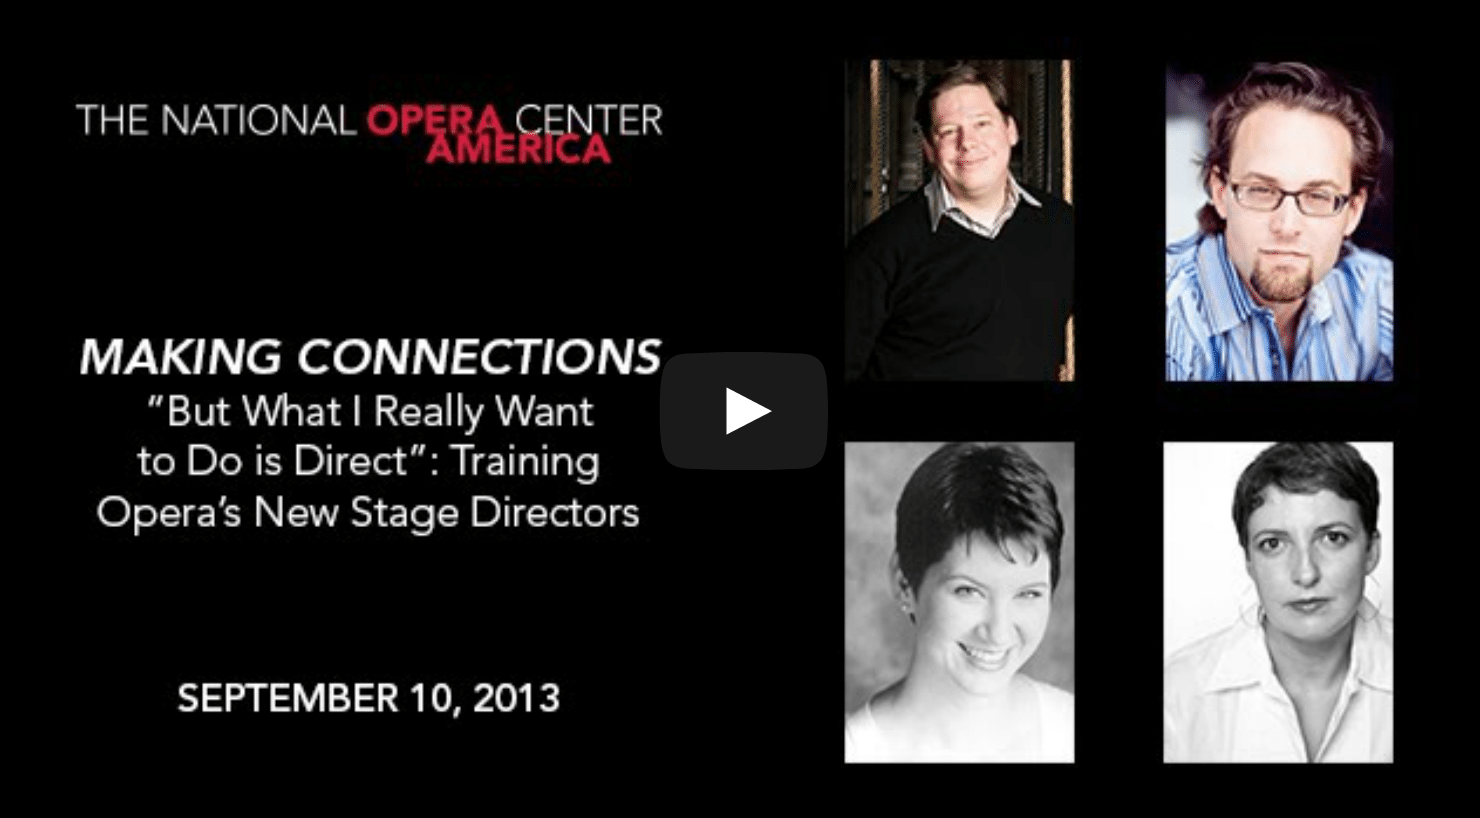 "But What I Really Want to do is Direct" - On Site Opera